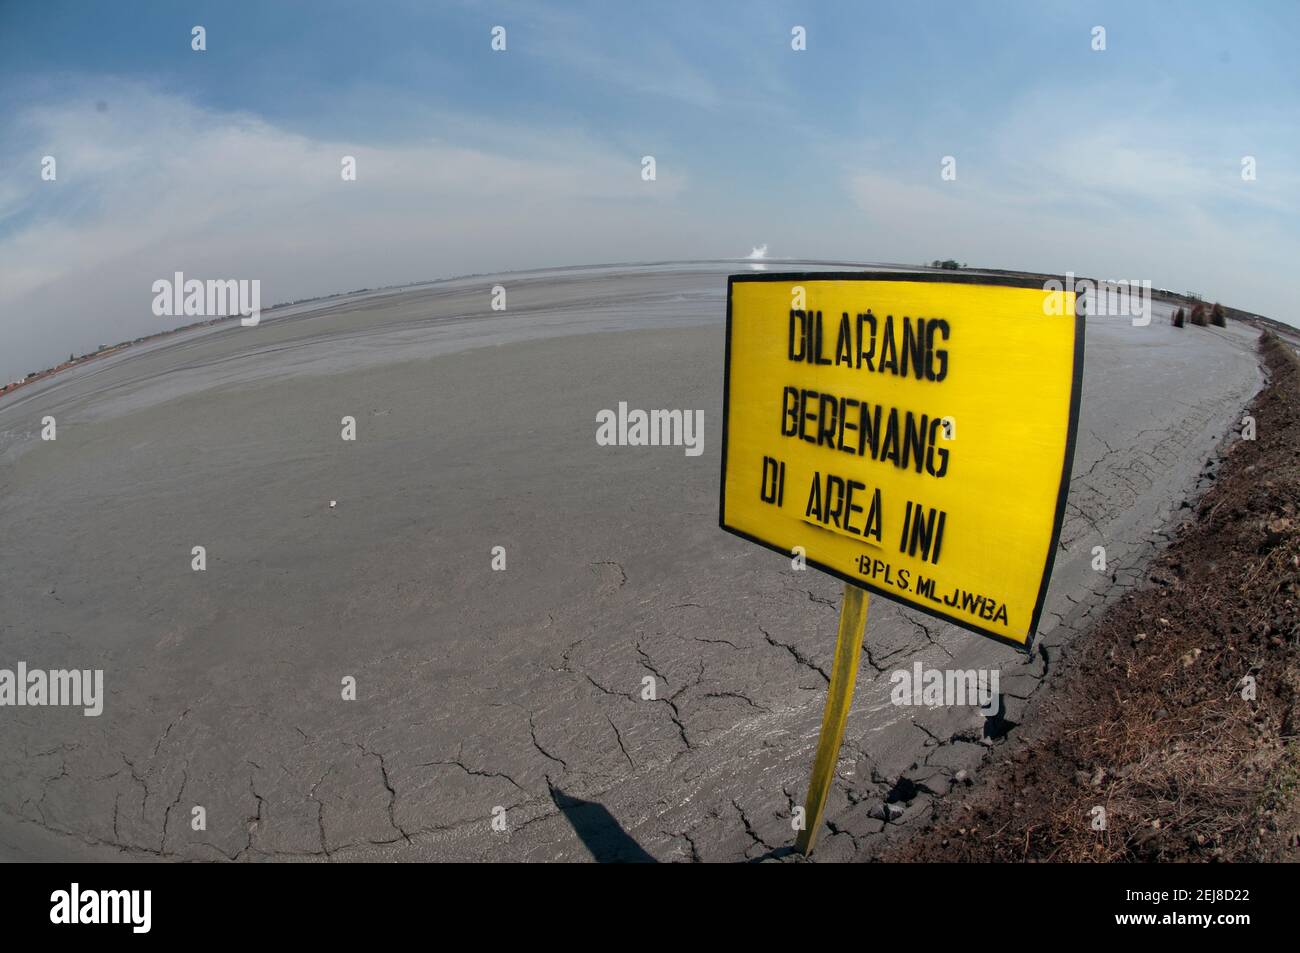 Do not swim sign in Indonesian in mud lake environmental disaster which developed after drilling incident, Porong Sidoarjo, near Surabaya, East Java, Stock Photo